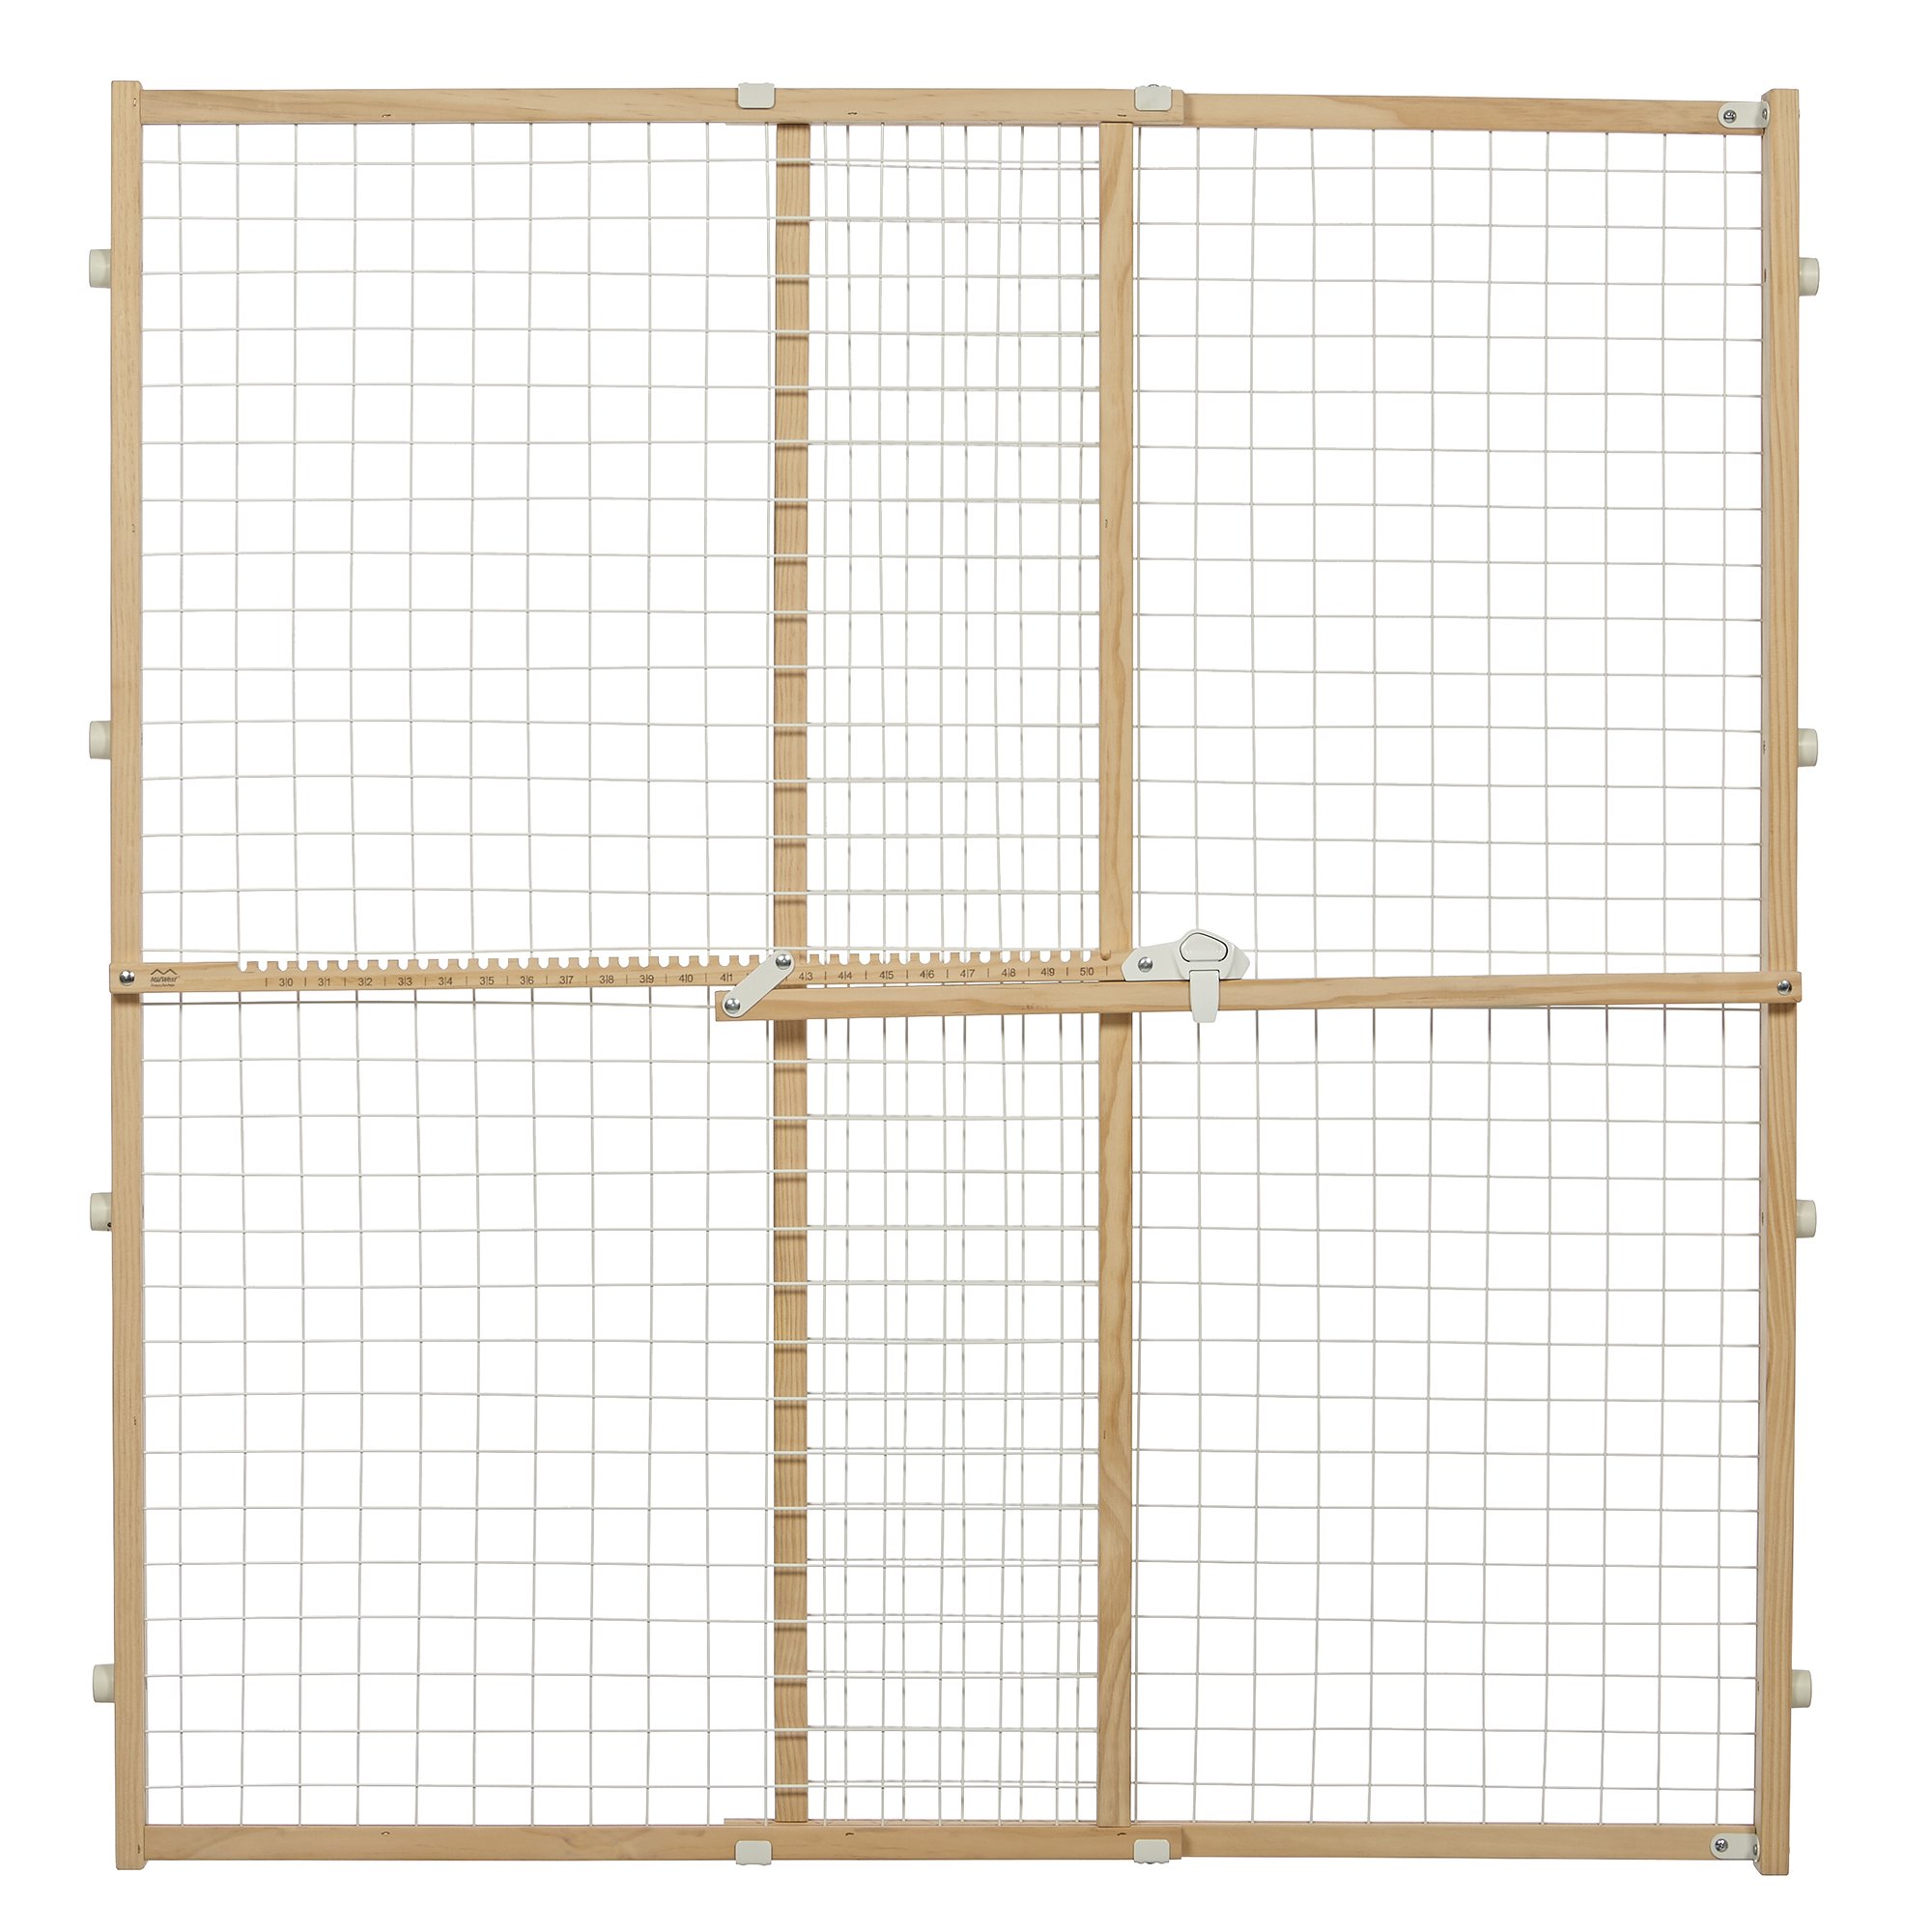 Midwest Wire Mesh Pet Safety Gate for Dogs, 44"H, Large - X-Tall, Natural Wood